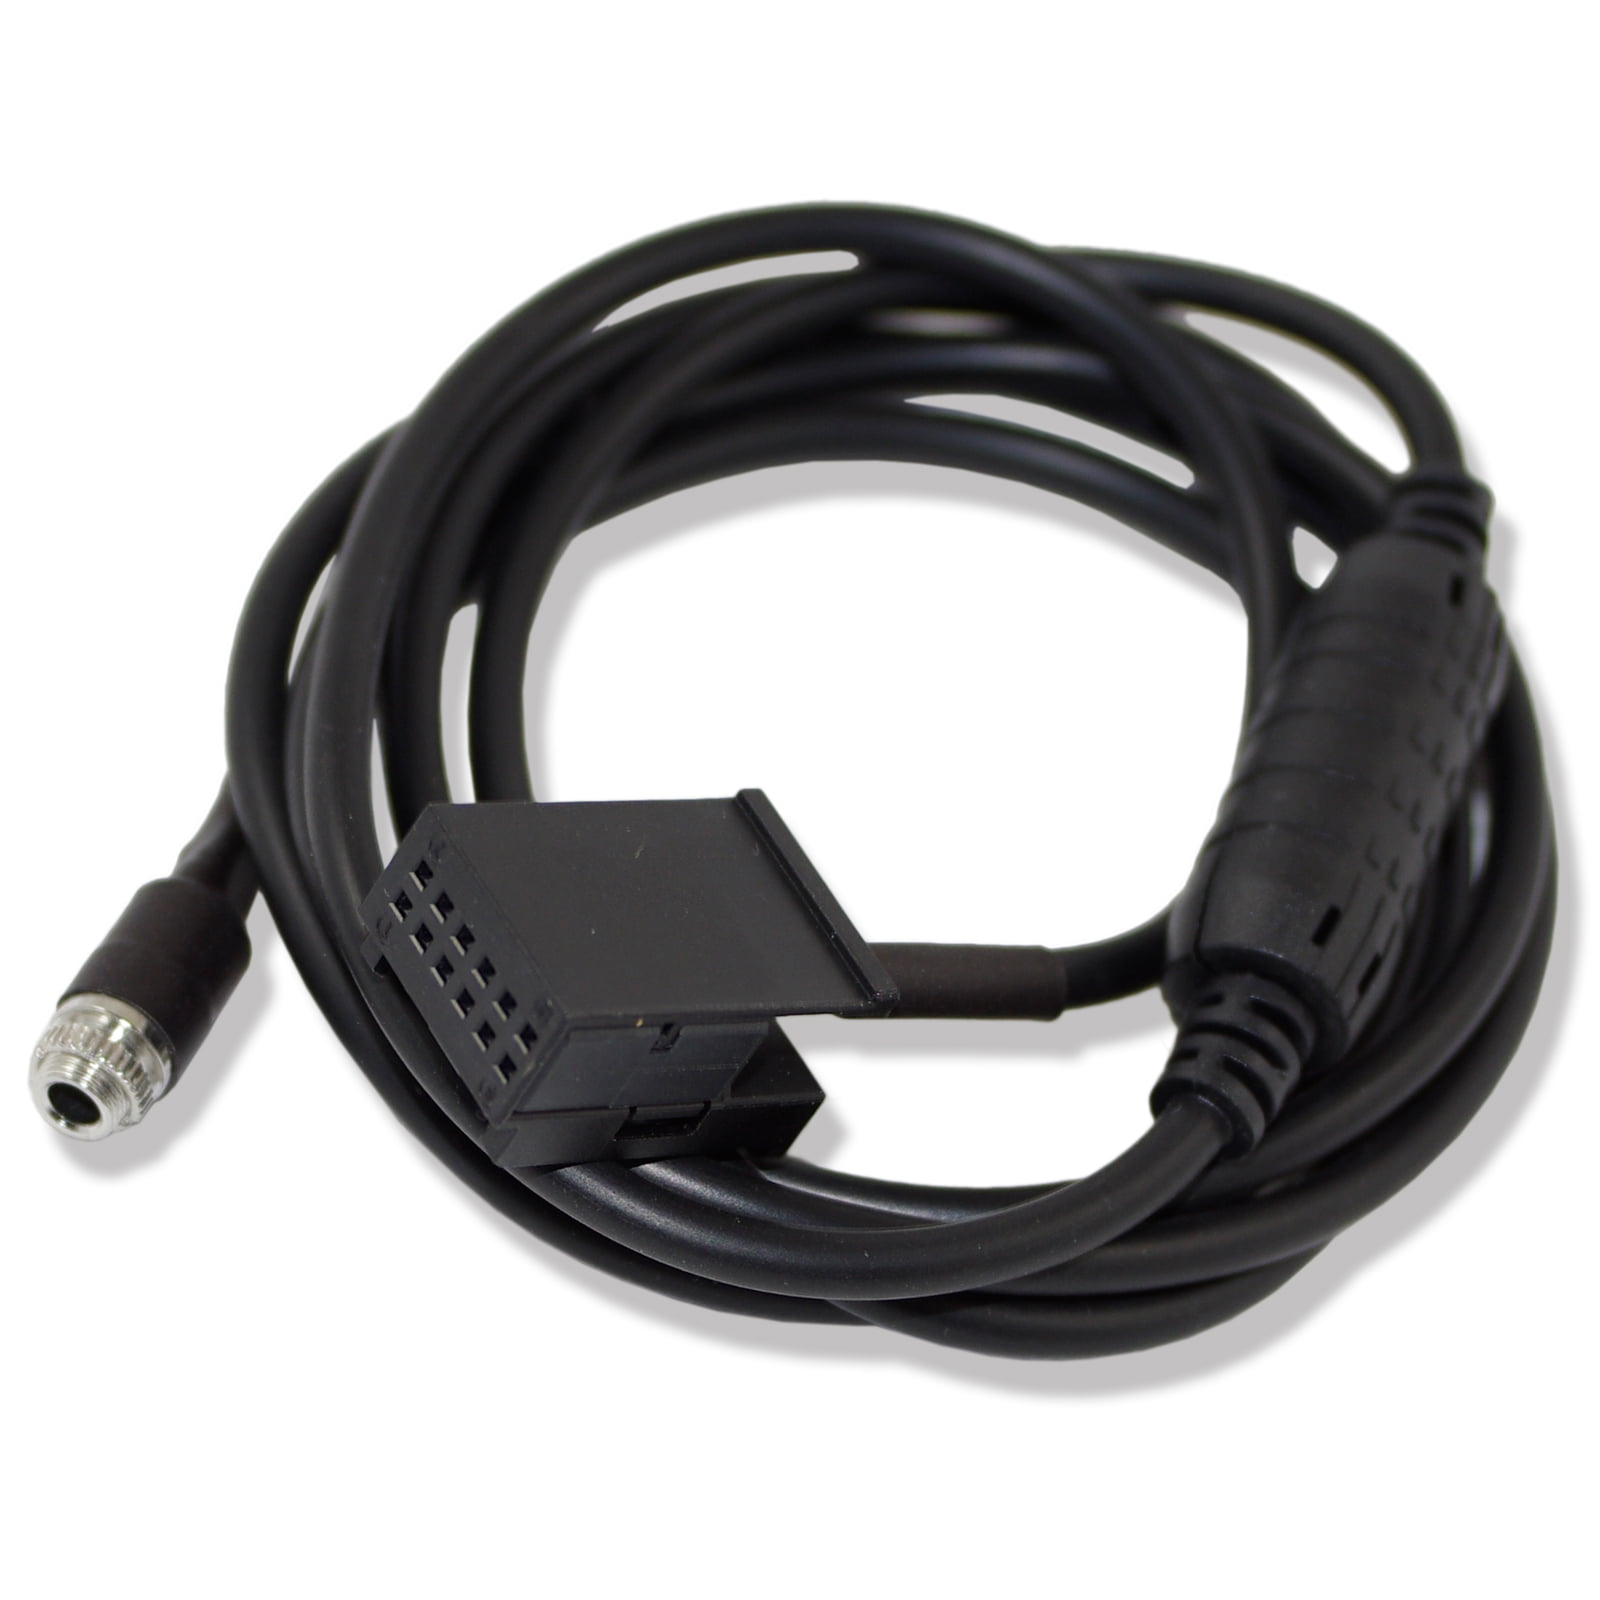 New 3.5MM Female AUX Audio Adapter Cable For BMW Z4 E83